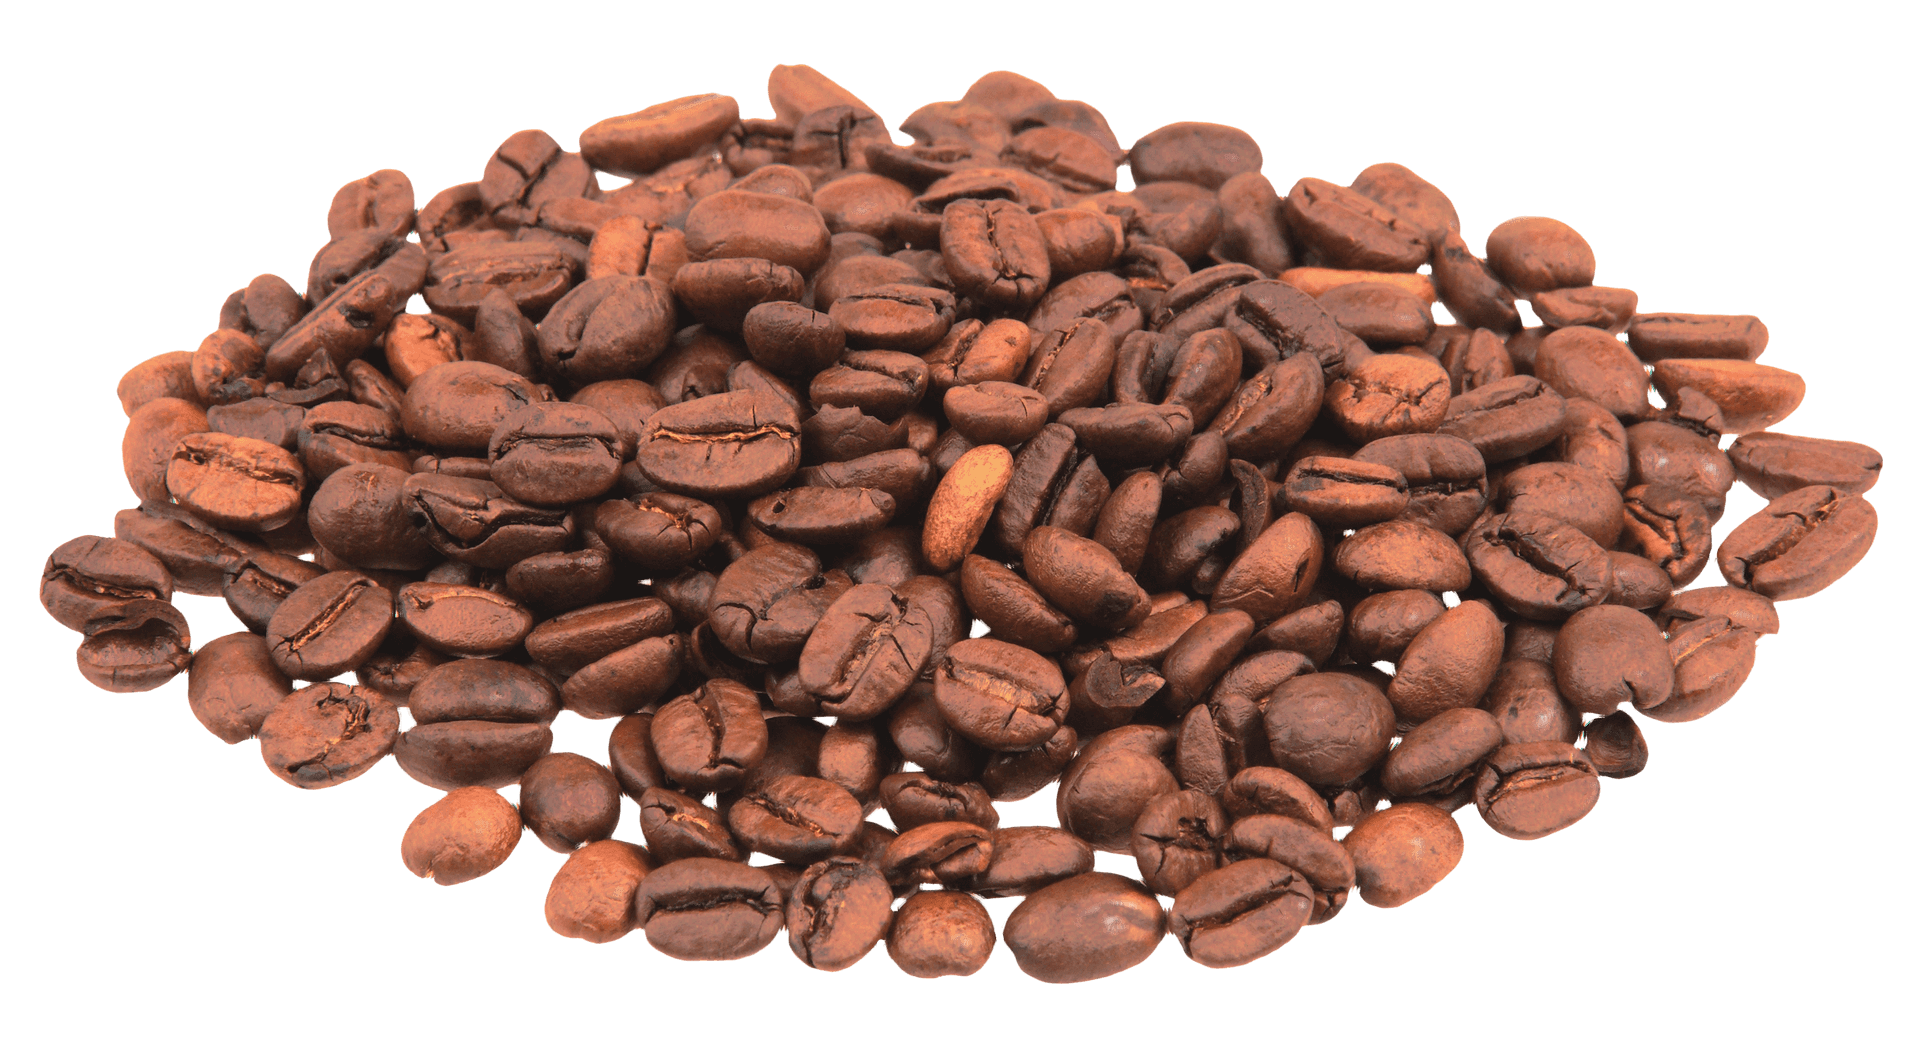 Roasted Coffee Beans Pile.png PNG